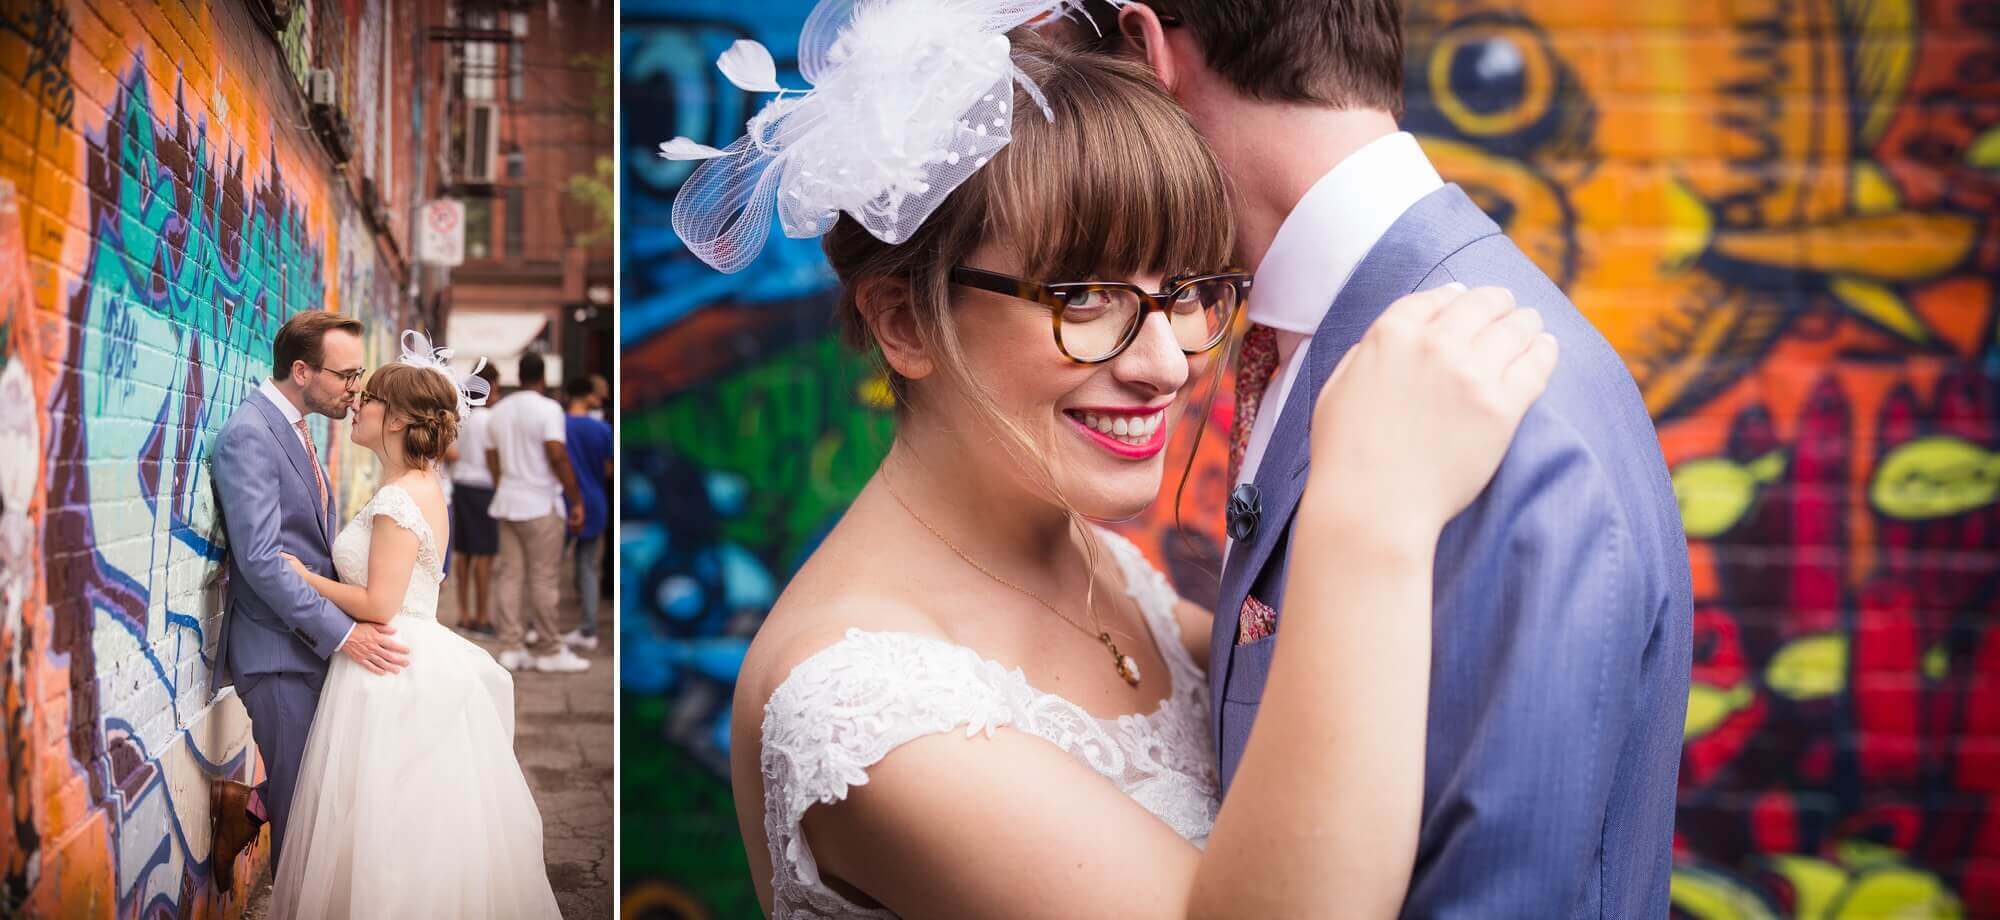 Portraits of the bride and groom in a colourful, graffiti, alley way in Toronto